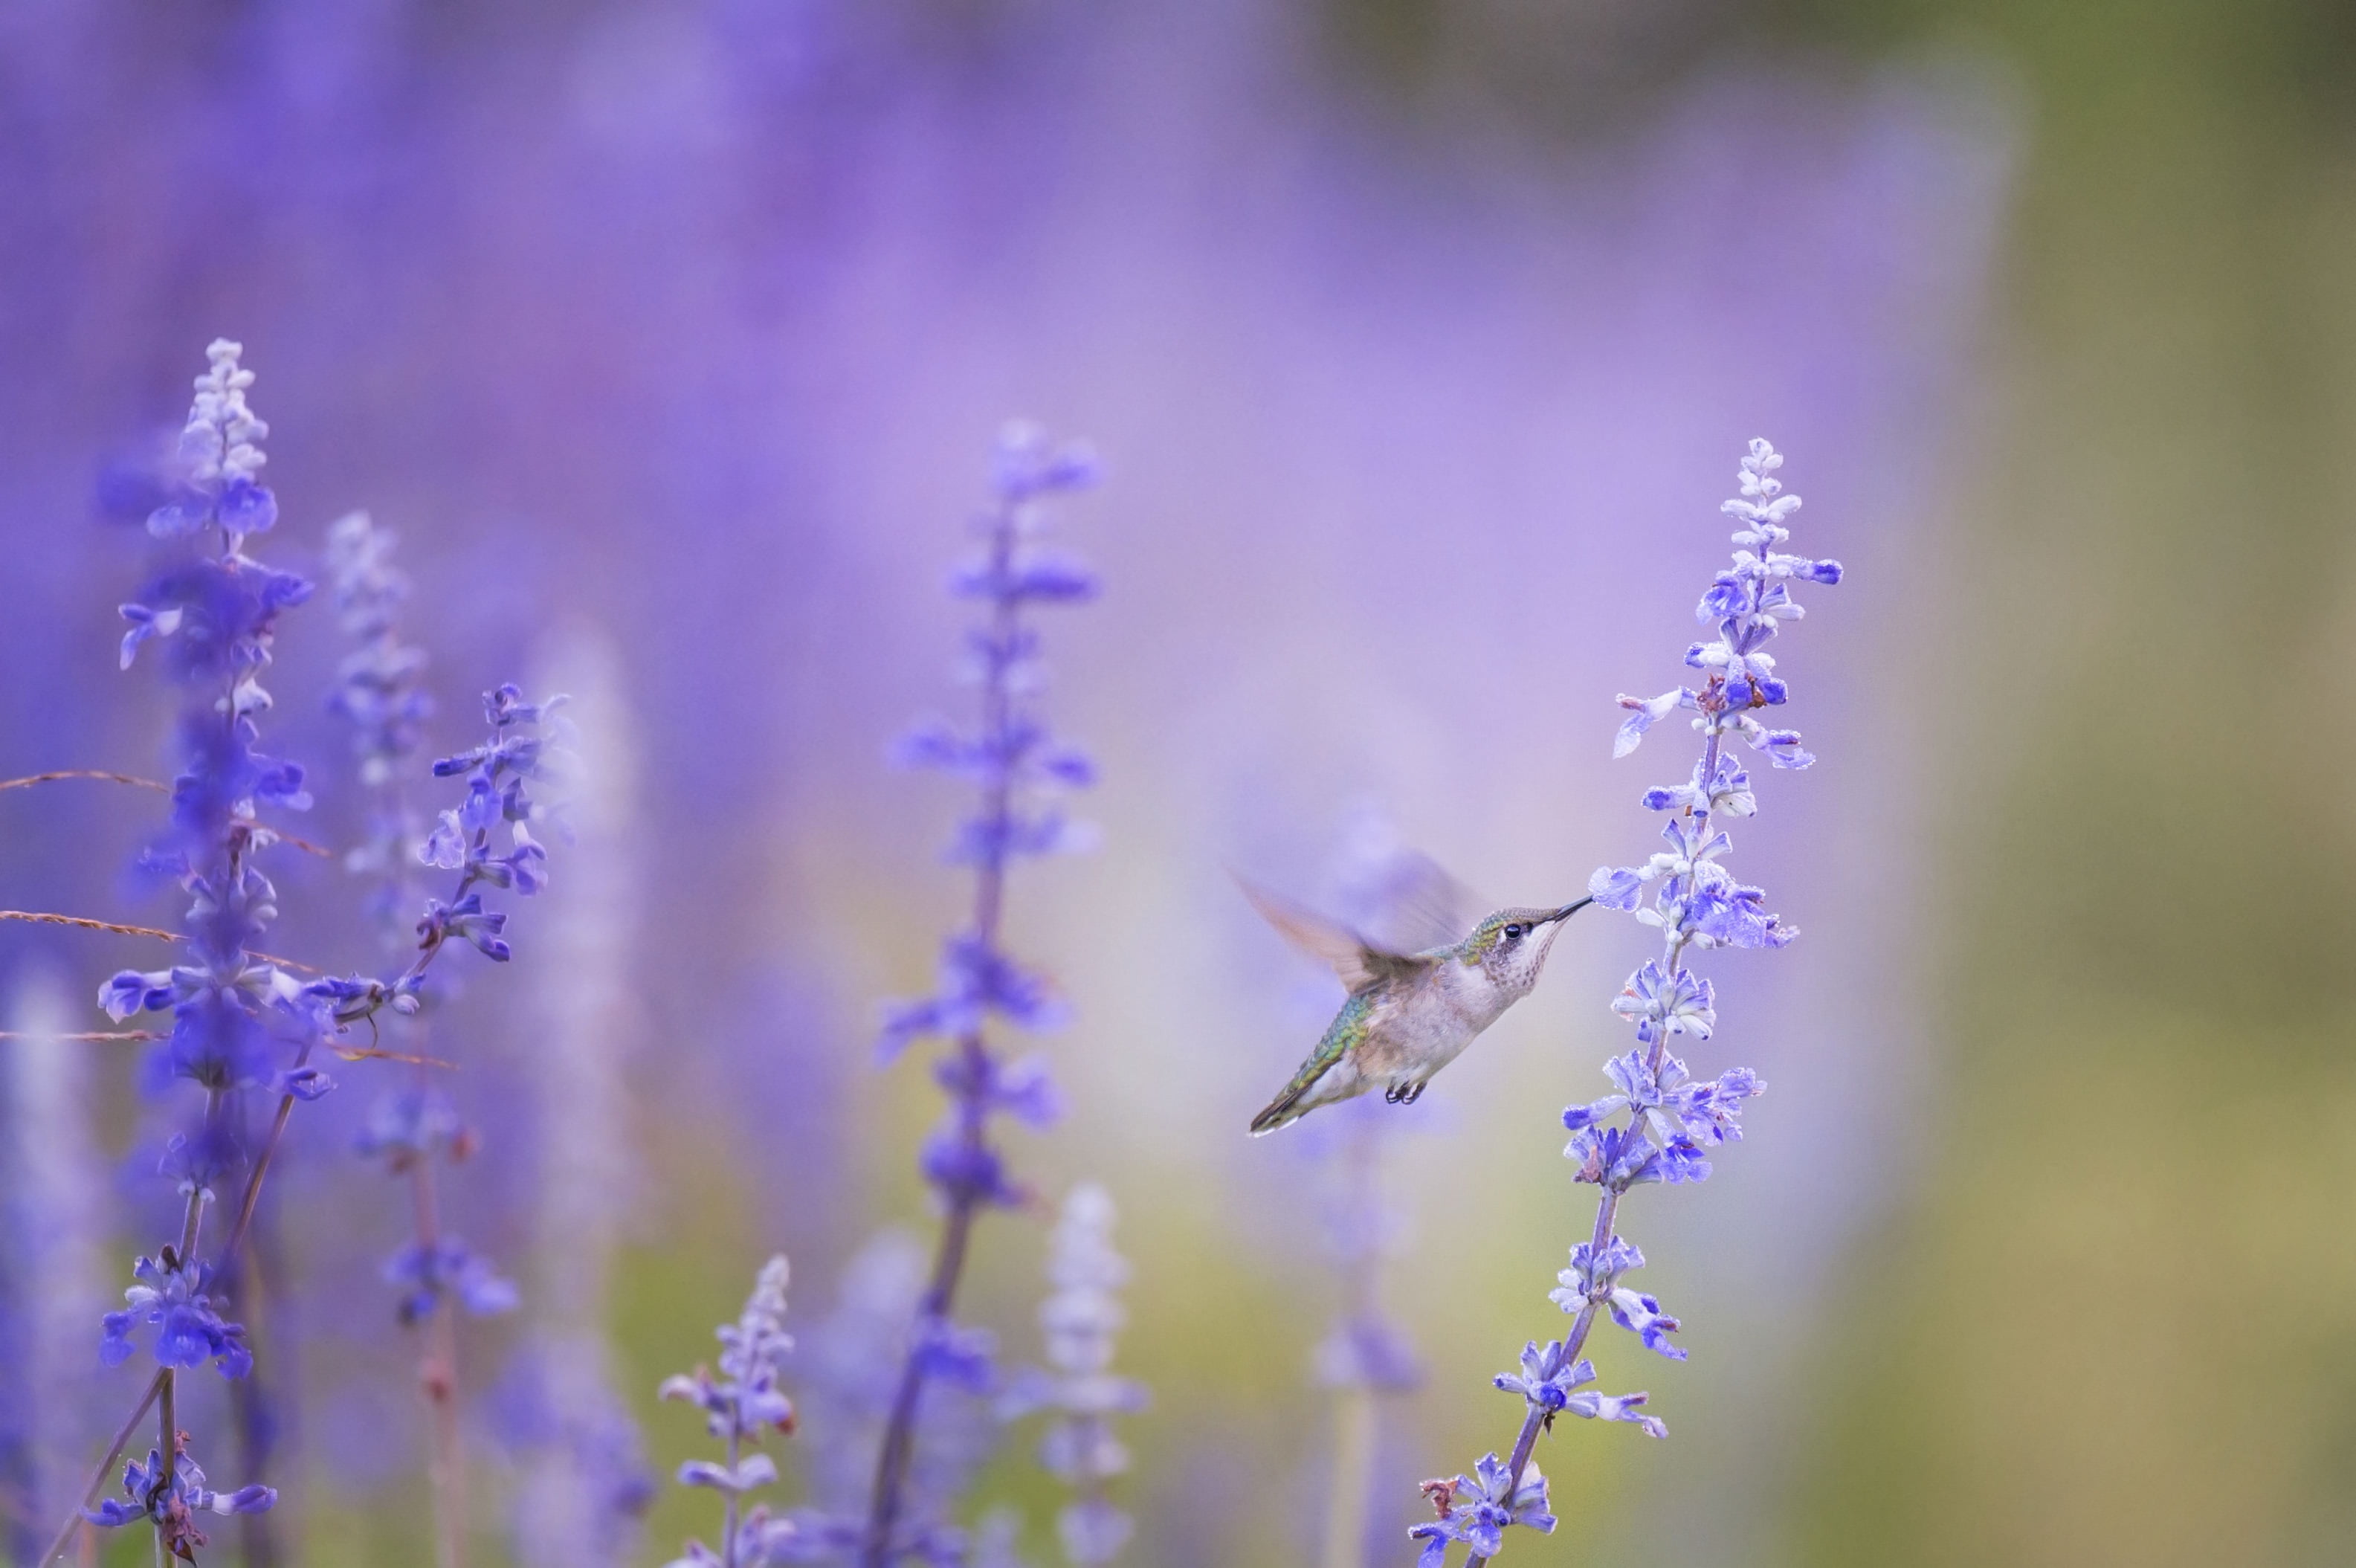 gray and white bird near the purple flower bud selective focus photography \